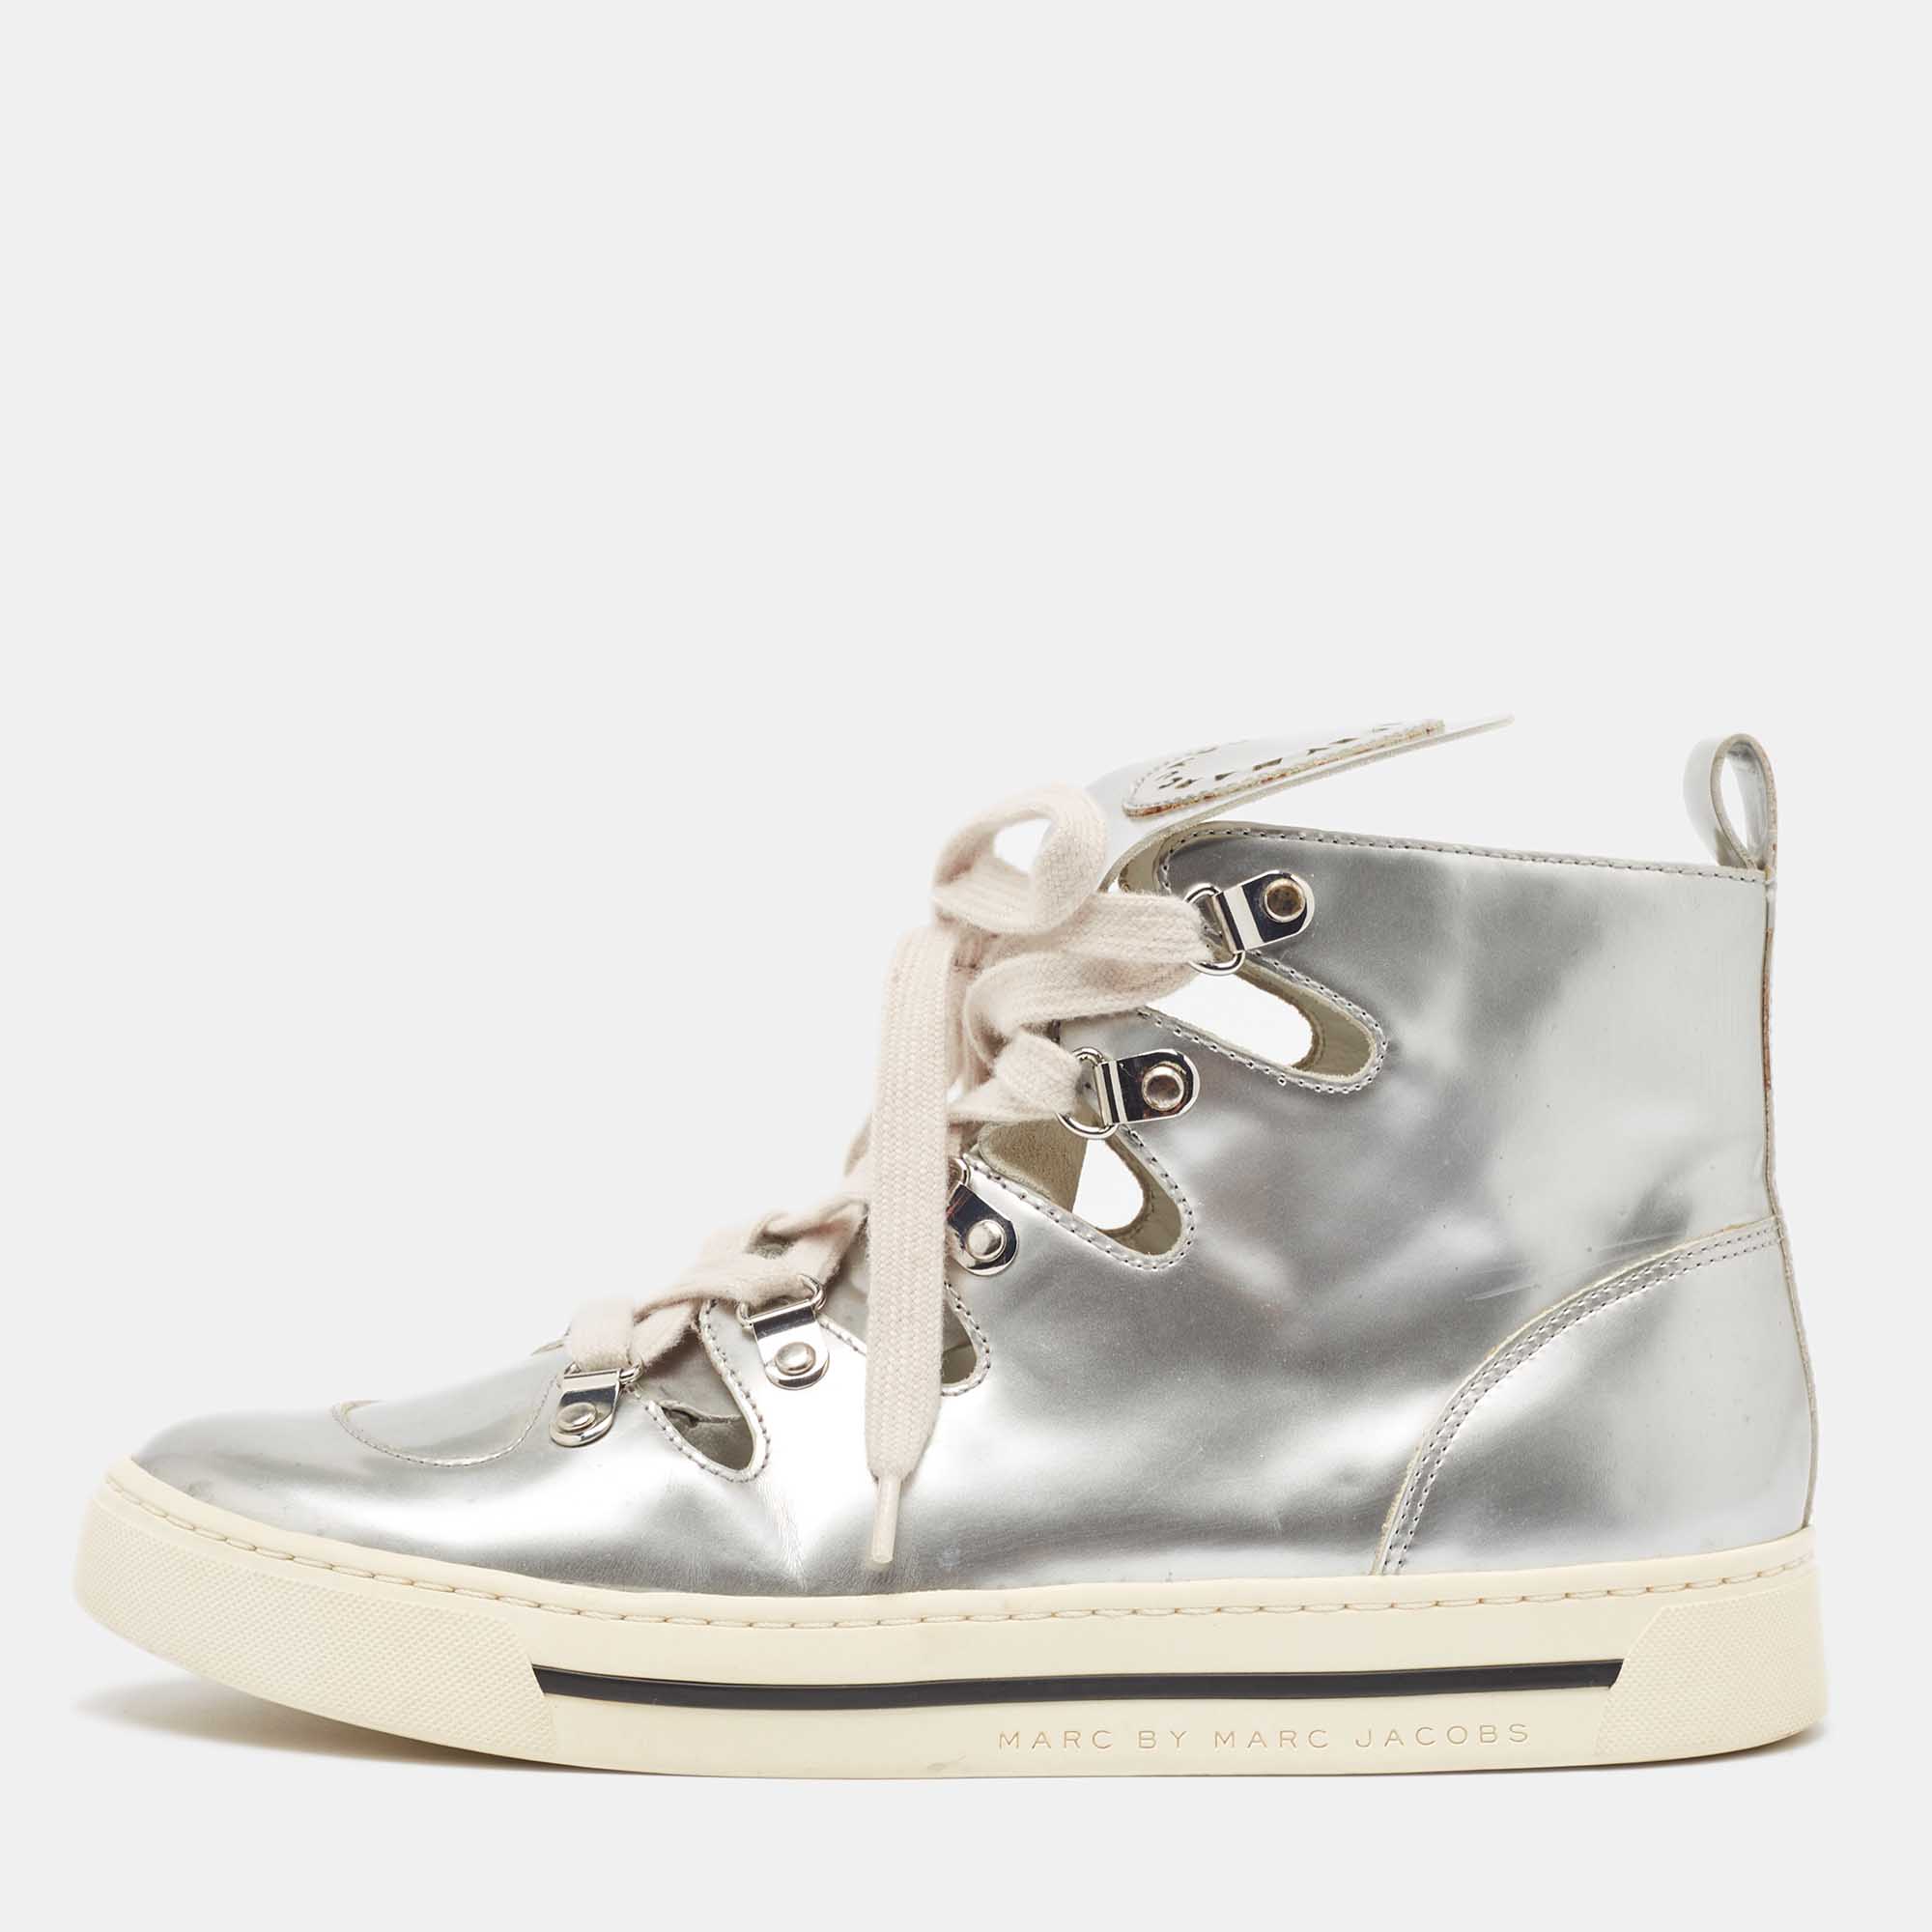 Marc by marc jacobs silver leather cutout high top sneakers size 37